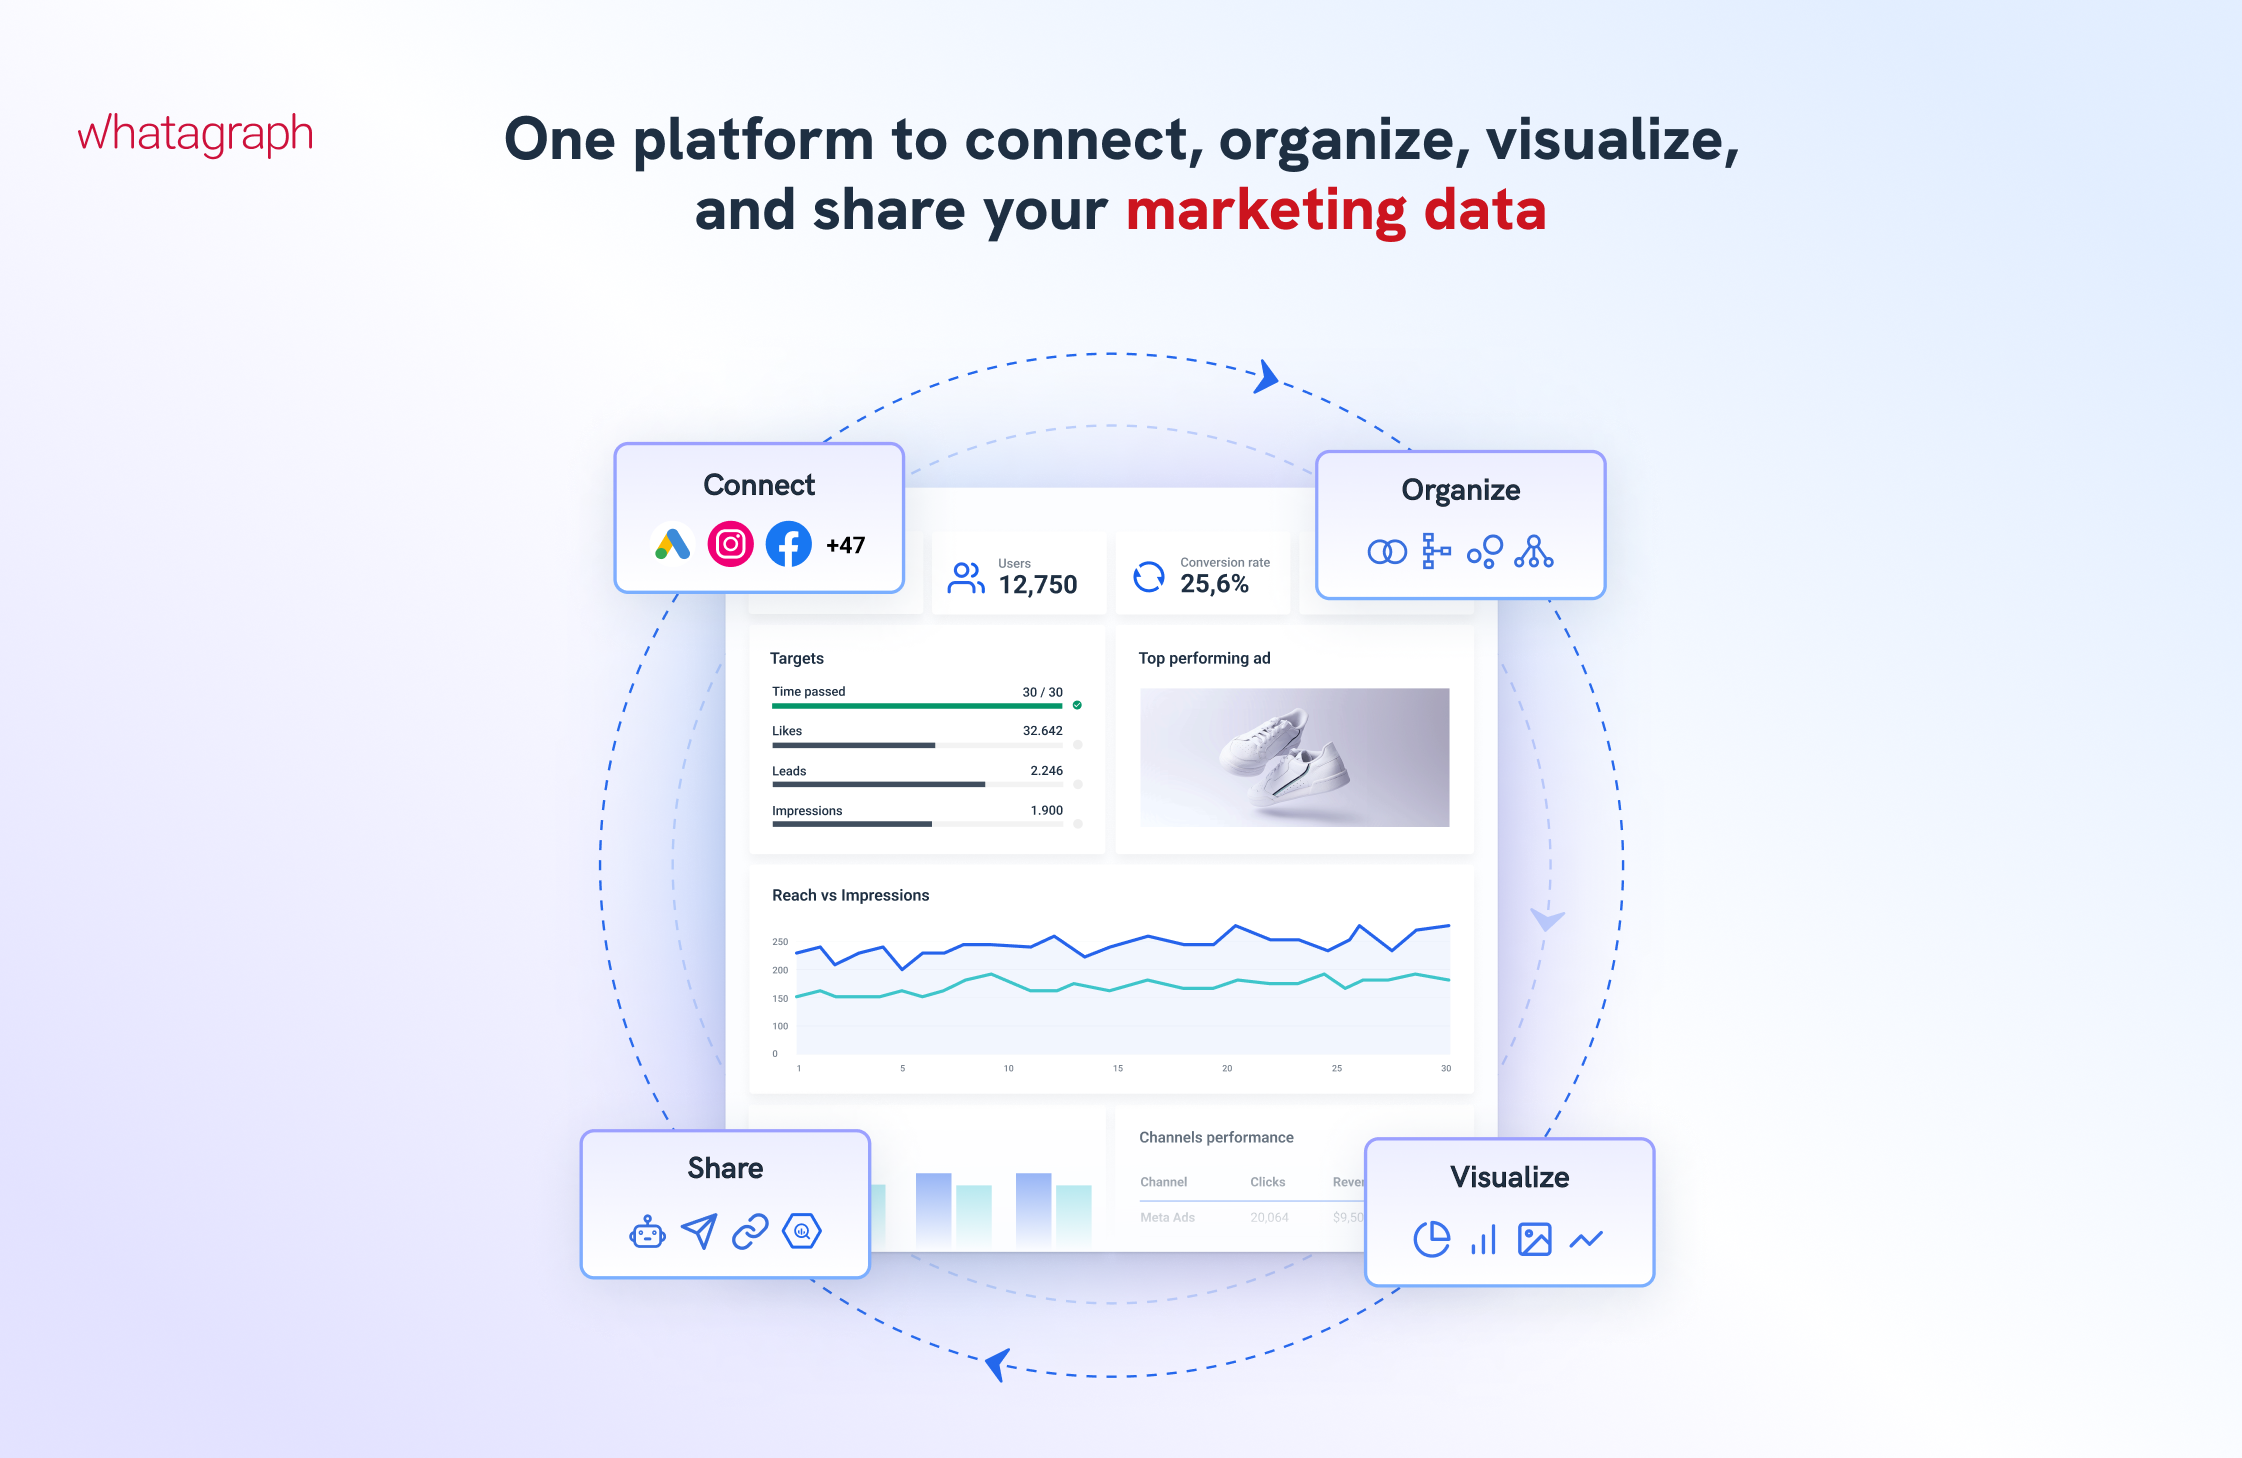 One marketing data platform to connect, organize, visualize, and share all your marketing data